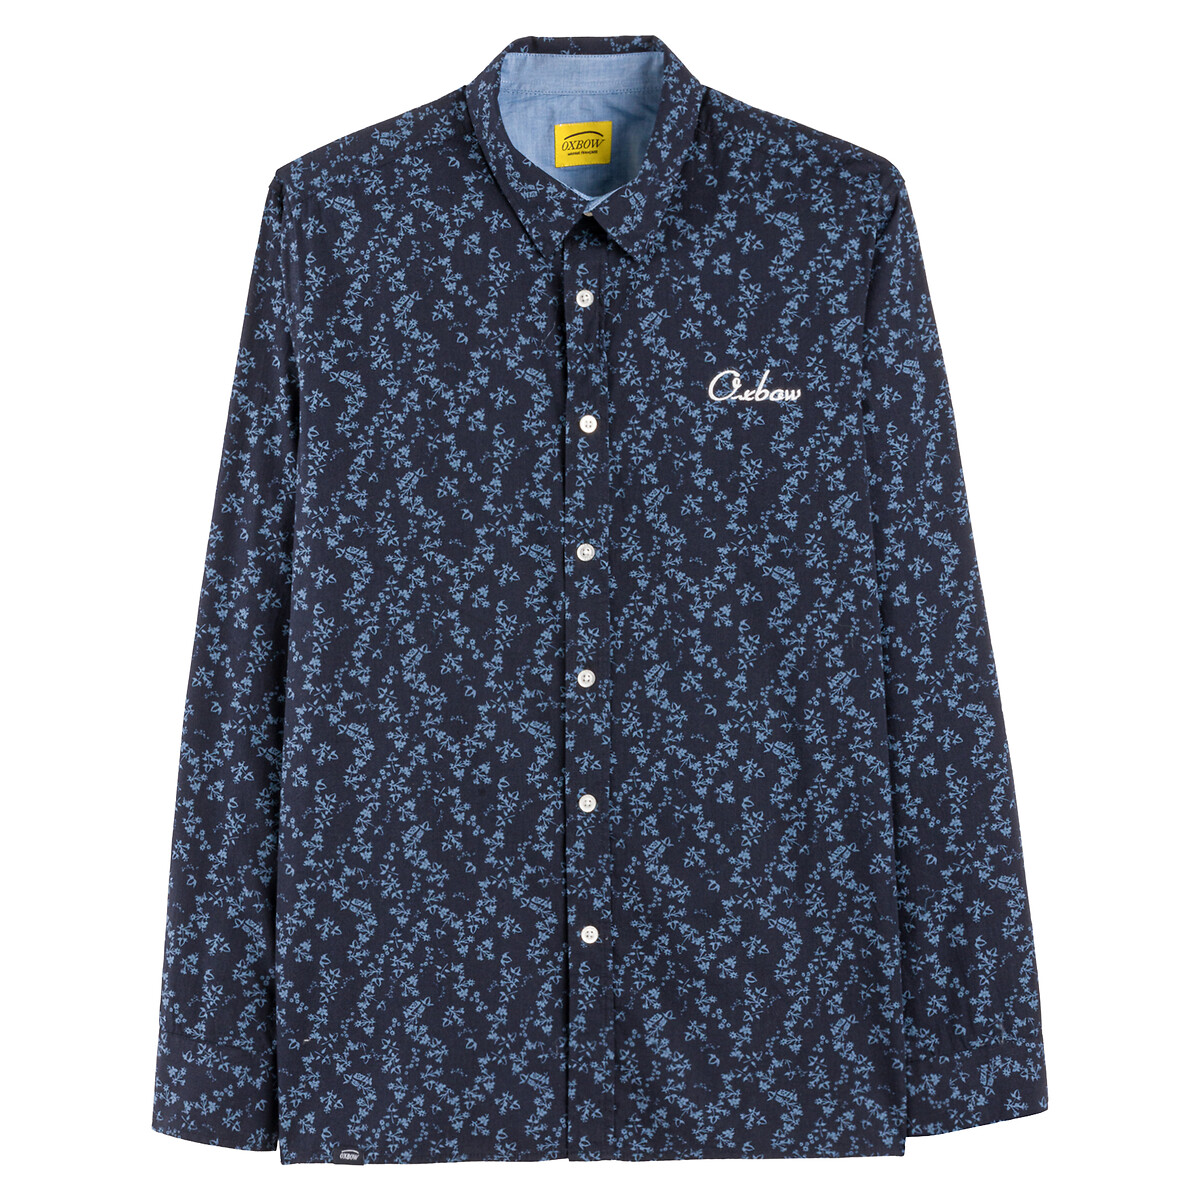 Microprint Cotton Shirt with Long Sleeves